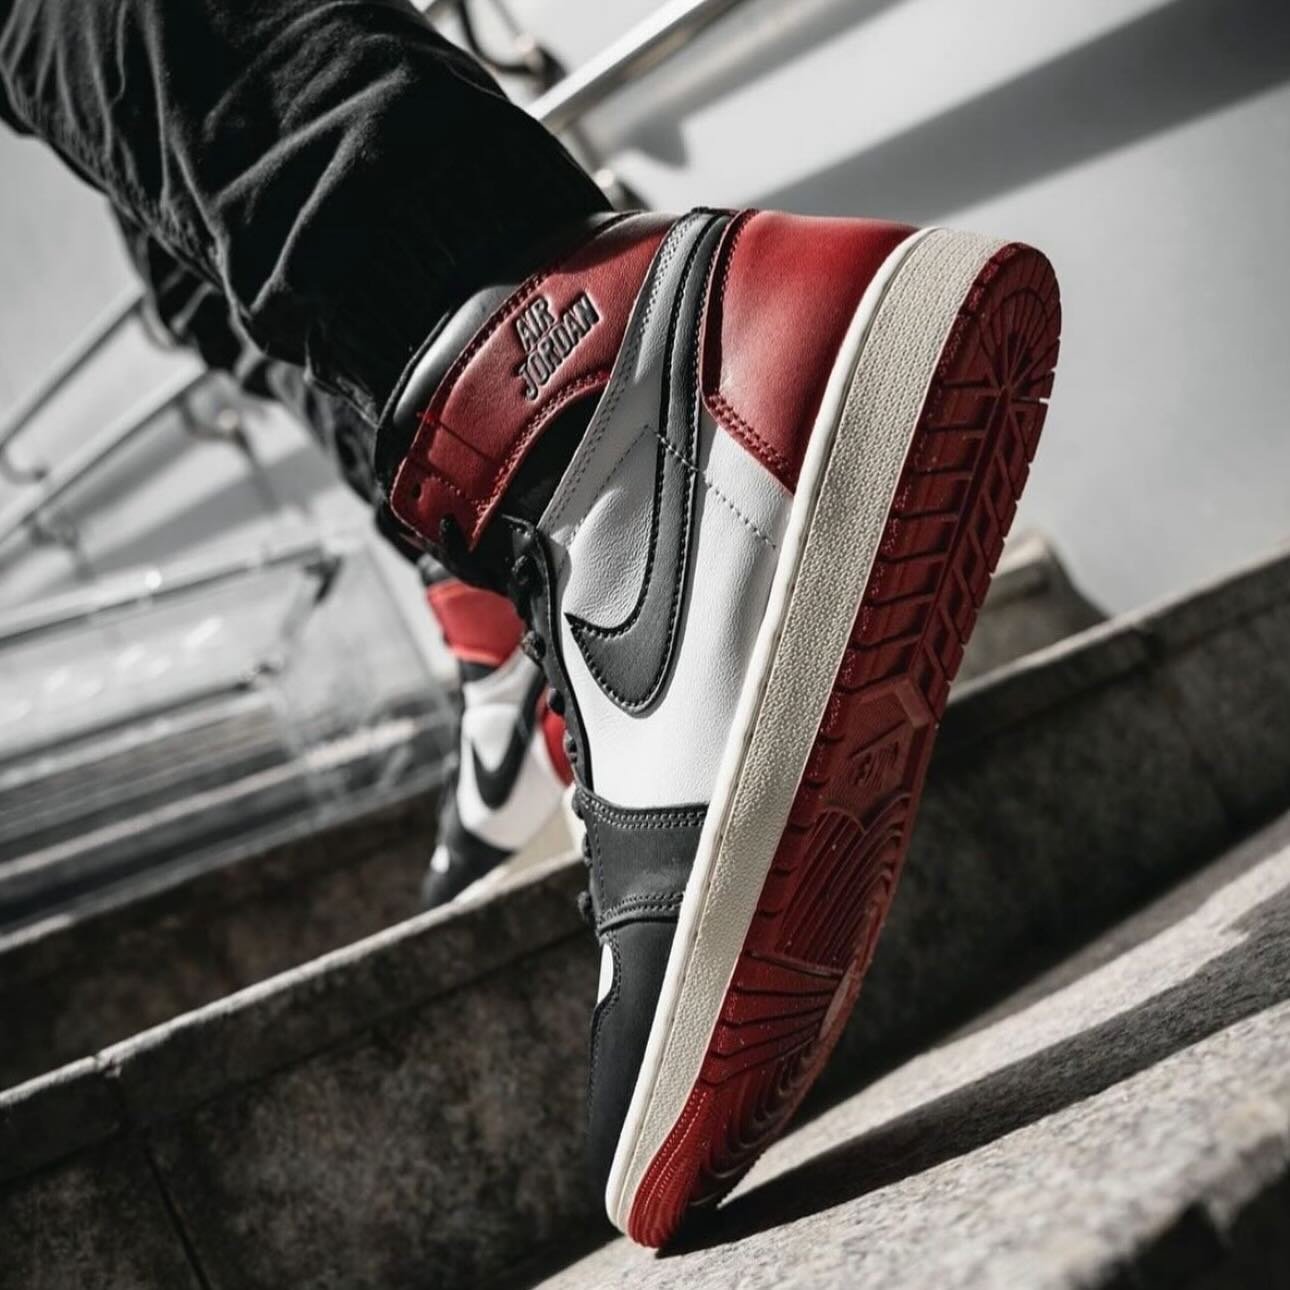 With Nike&rsquo;s &lsquo;Re-imagined&rsquo; collection continuously growing, the latest addition is the classic &lsquo;Black Toe&rsquo; Air Jordan 1 High. 

What do we think of this version? 🤔

Read the full article via link in bio NOW 💬 

#Sneaker